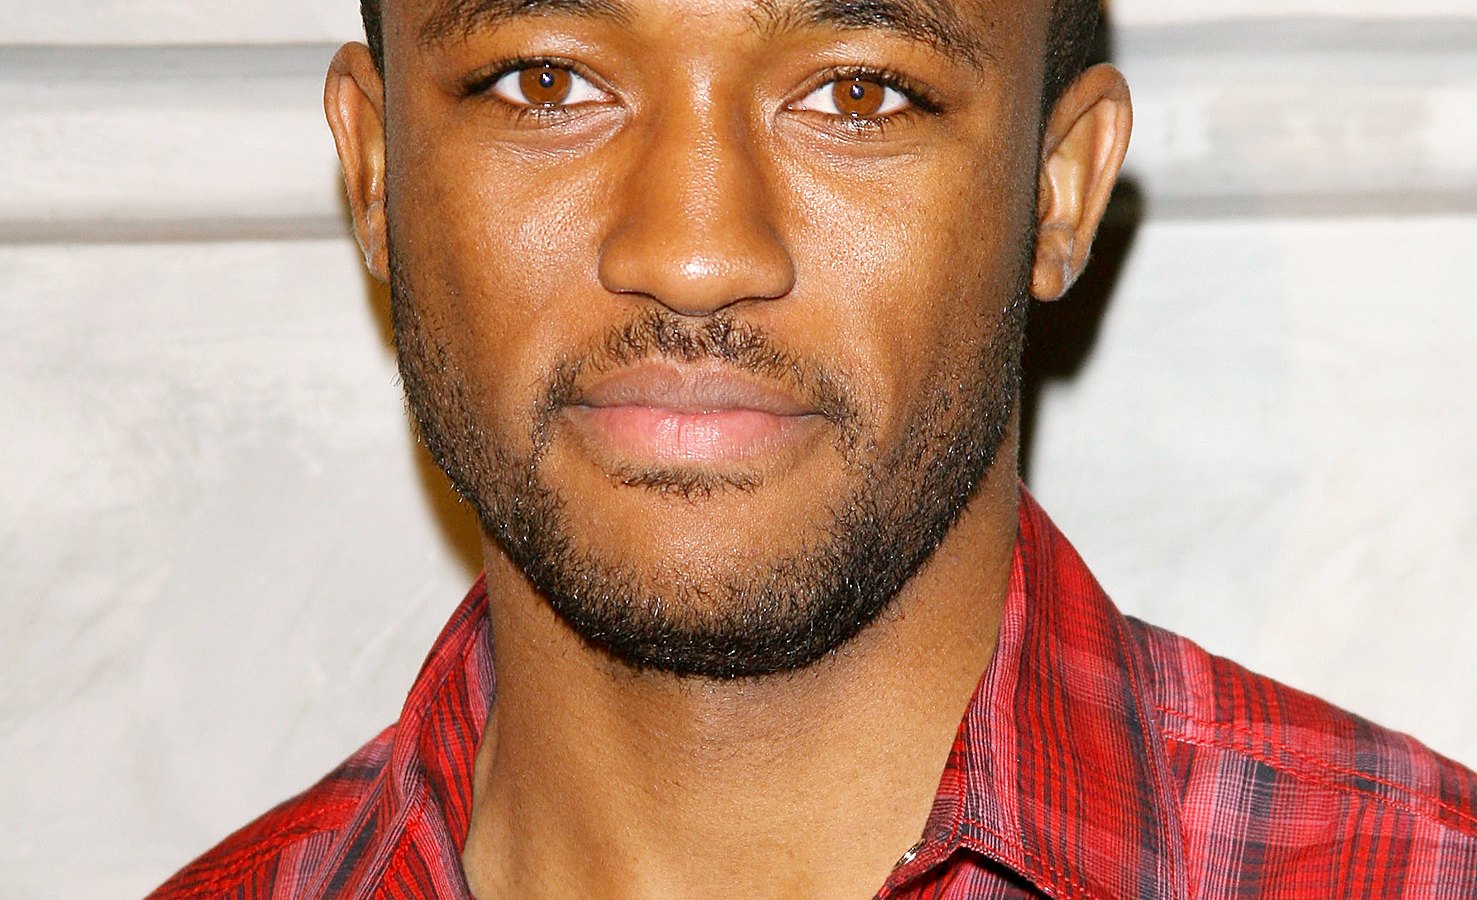 Lee Thompson Young attends an event on April 15, 2009